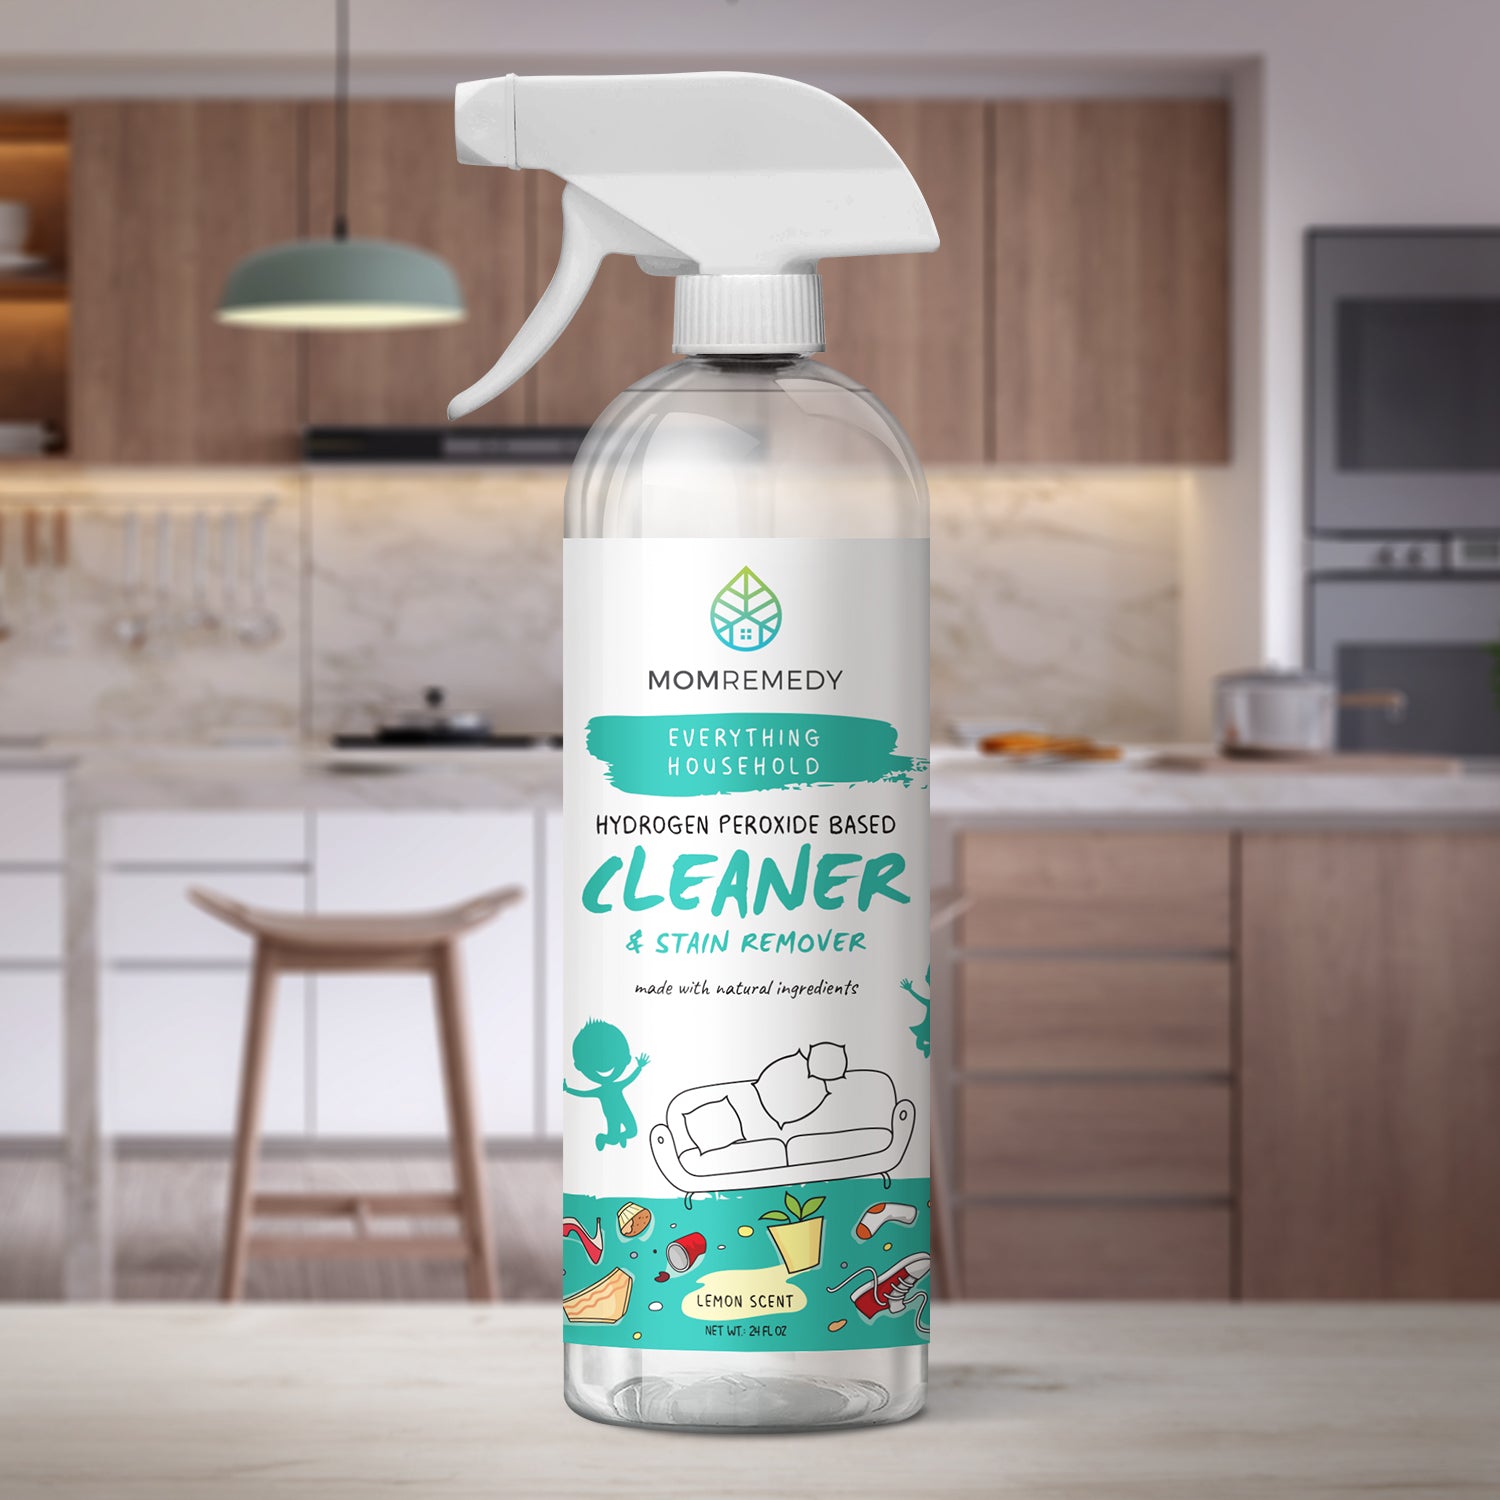 MomRemedy Hydrogen Peroxide Cleaner and stain remover for stains, spills, dirt. grime, pet messes, odors. Great for kitchens and everything household.